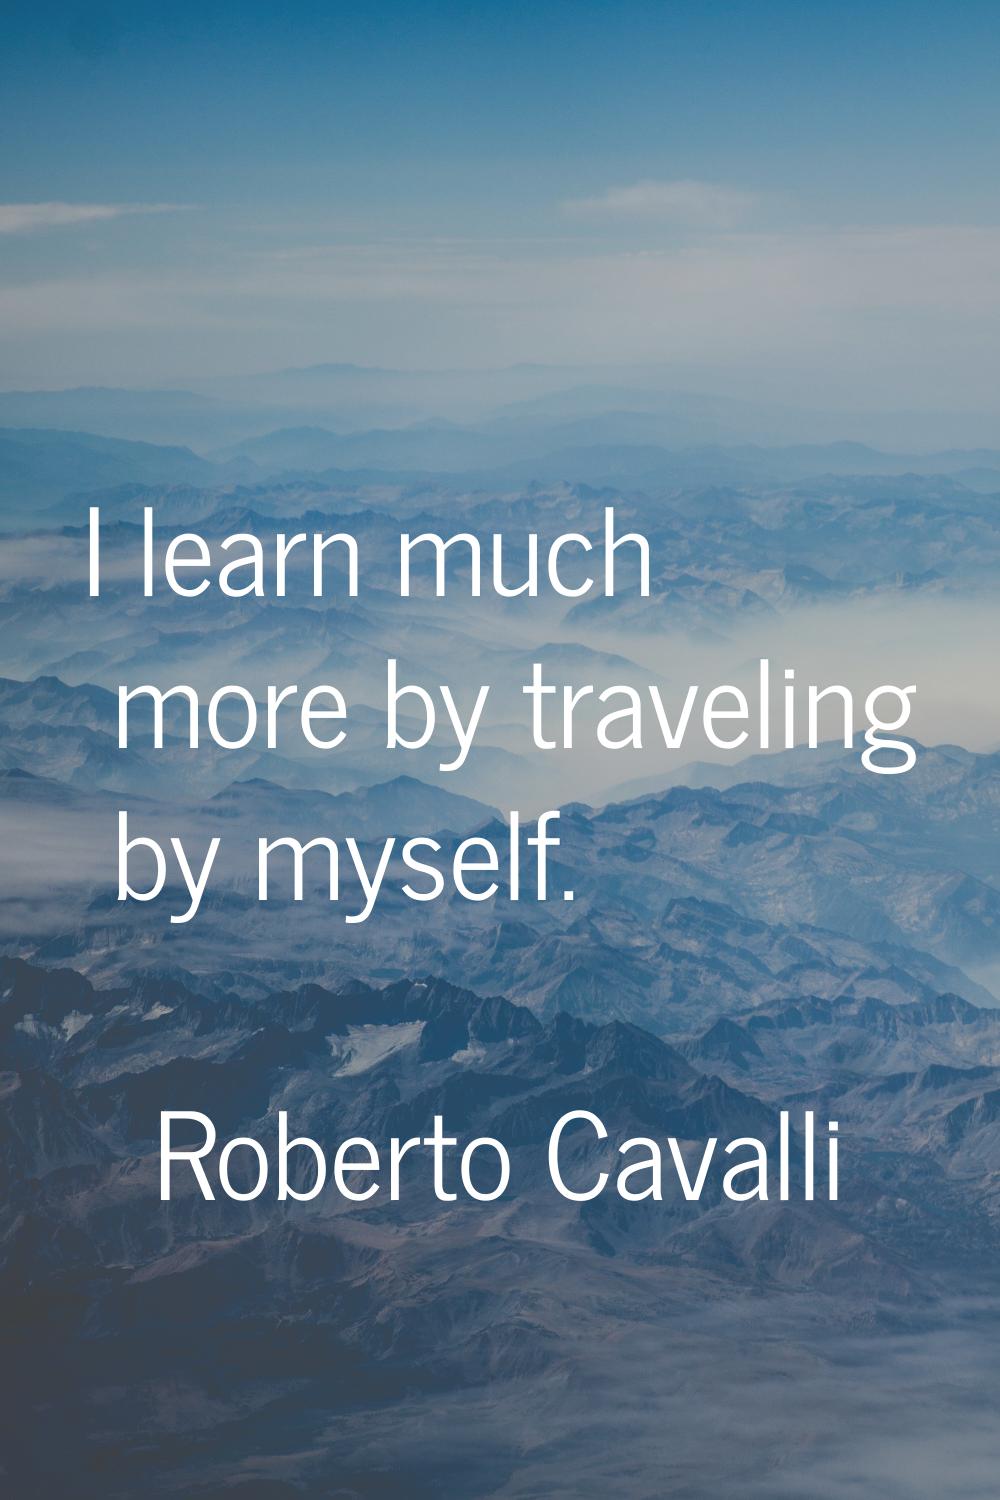 I learn much more by traveling by myself.